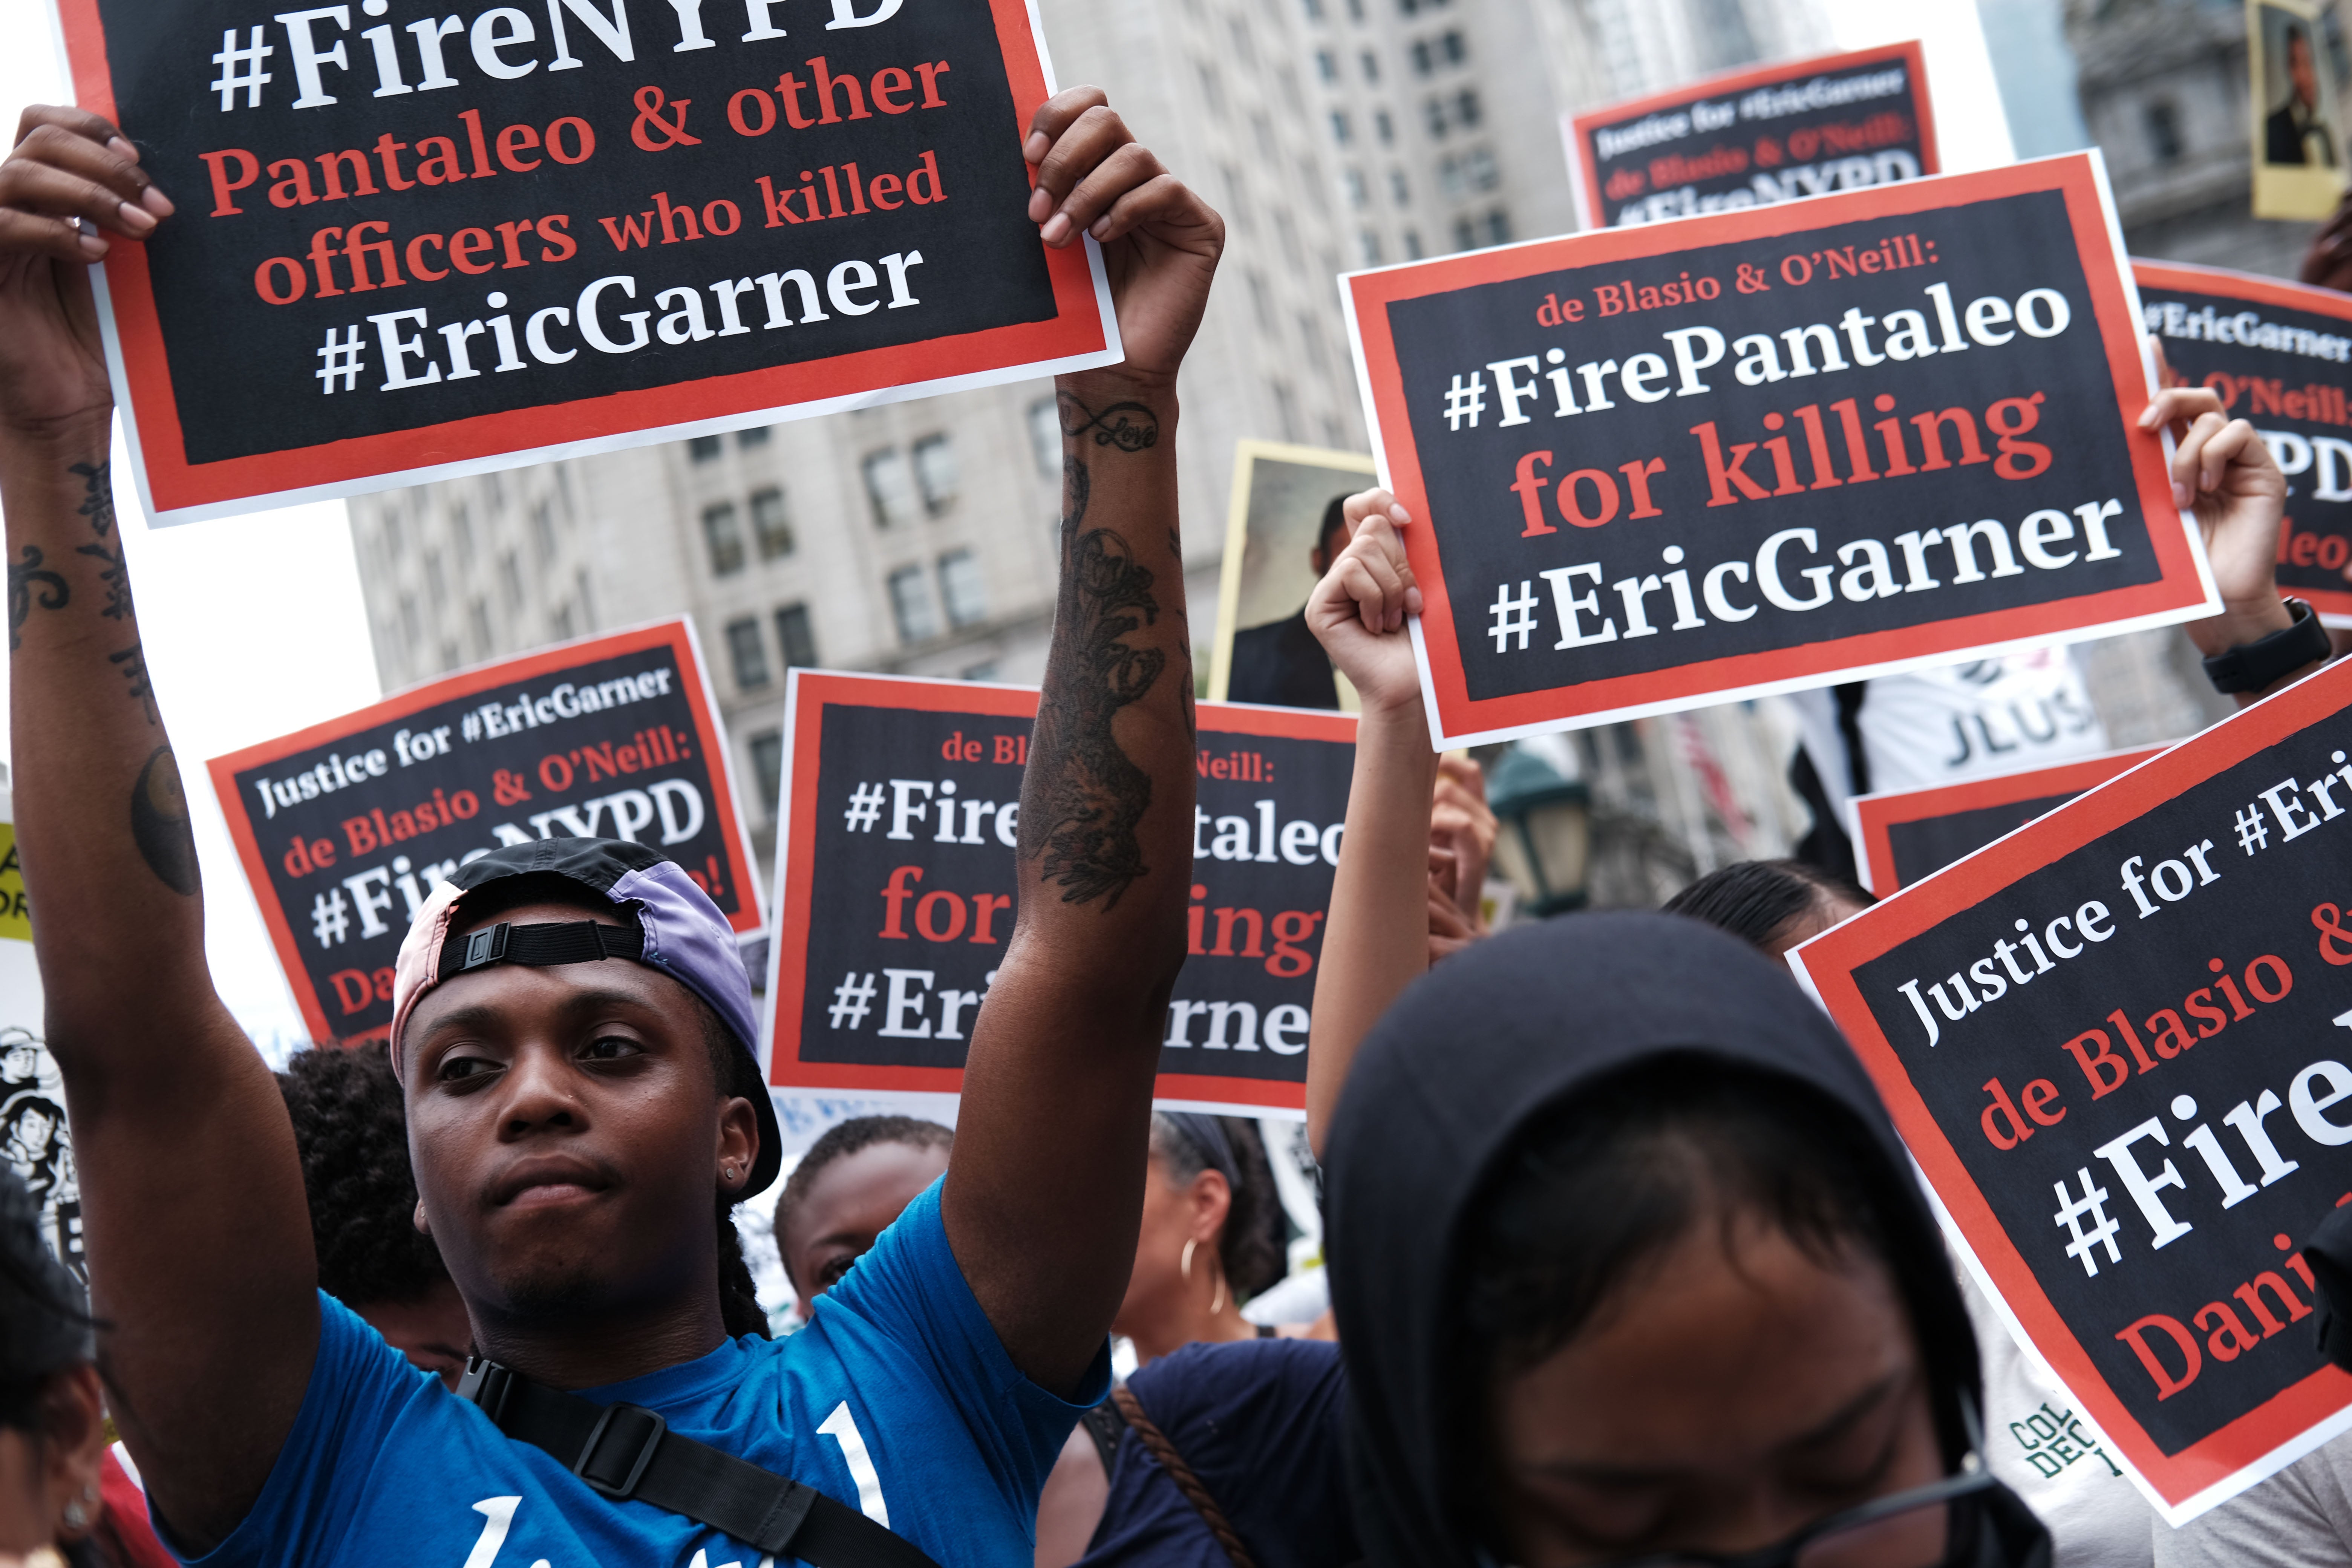 Eric Garner’s Mother Testifies Before Congress About Unconstitutional Policing Practices